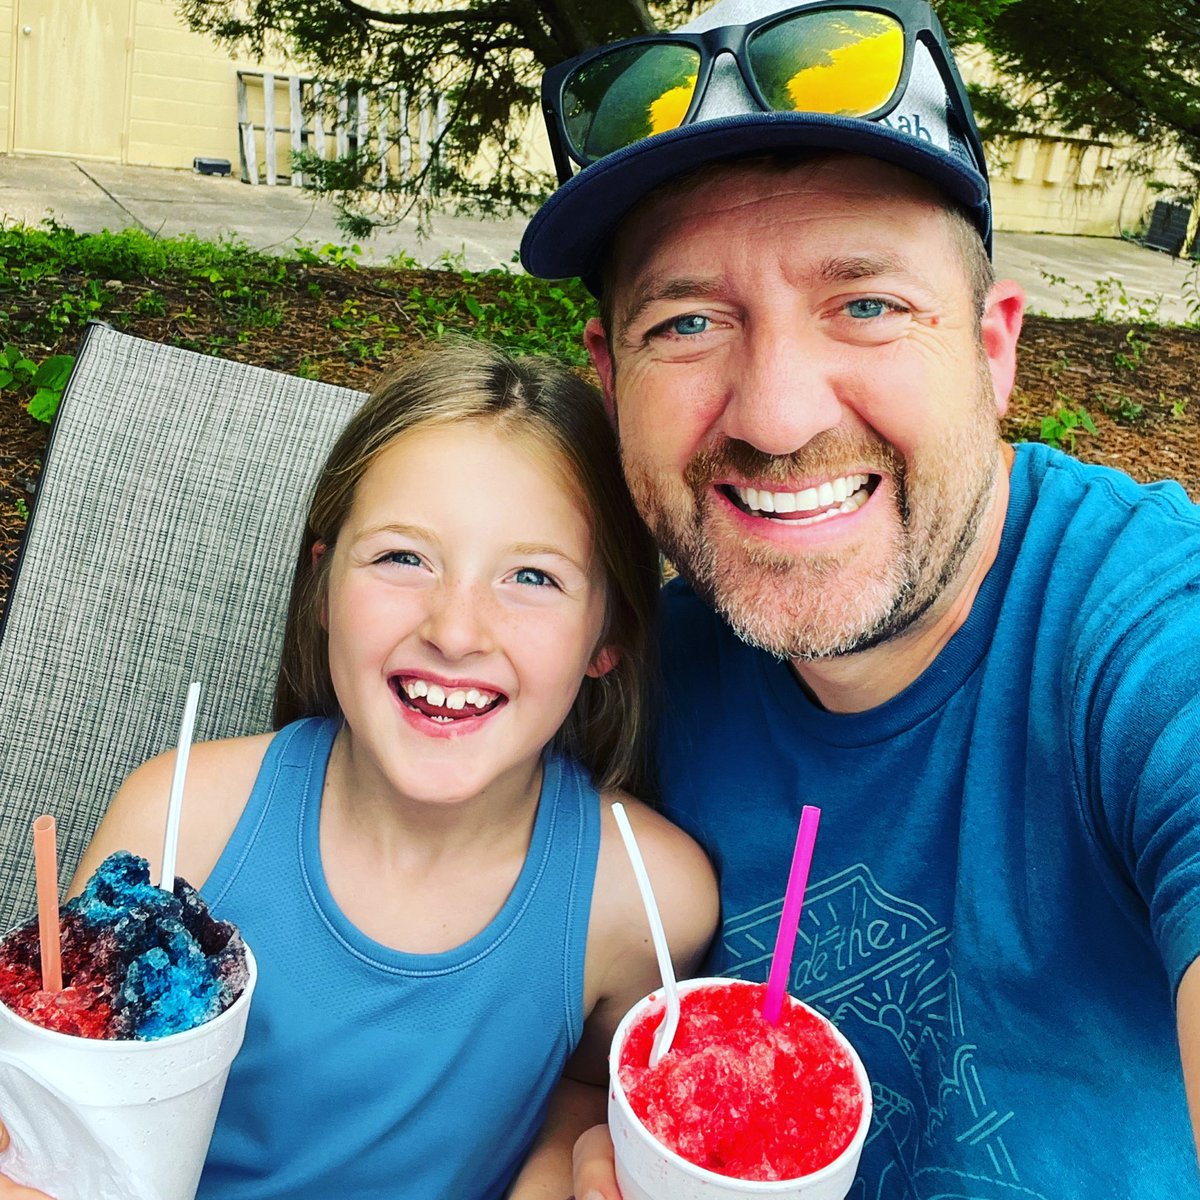 Fun snow cone🍧 date with my caboose! #summertimevibes